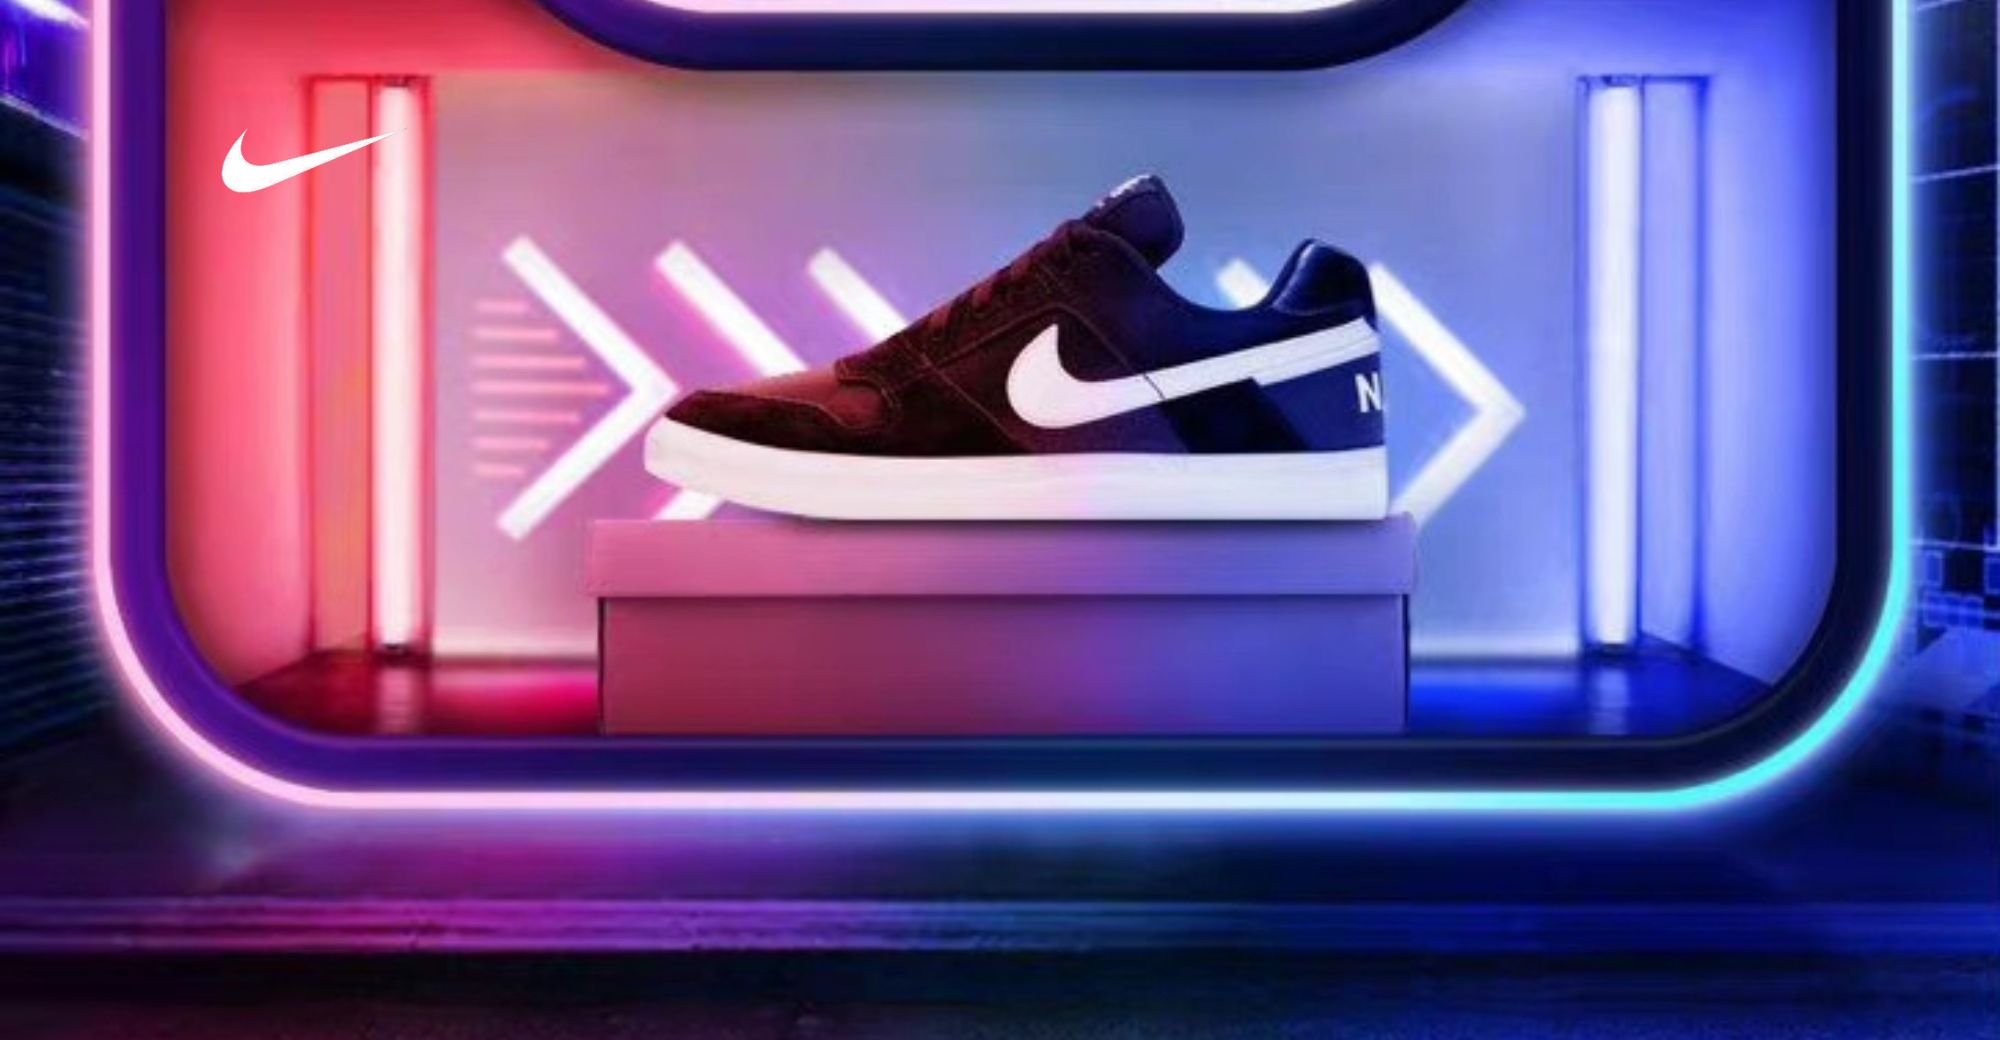 Nike’s Revenue in Greater China Decreases by 9% YoY in Fiscal 2022